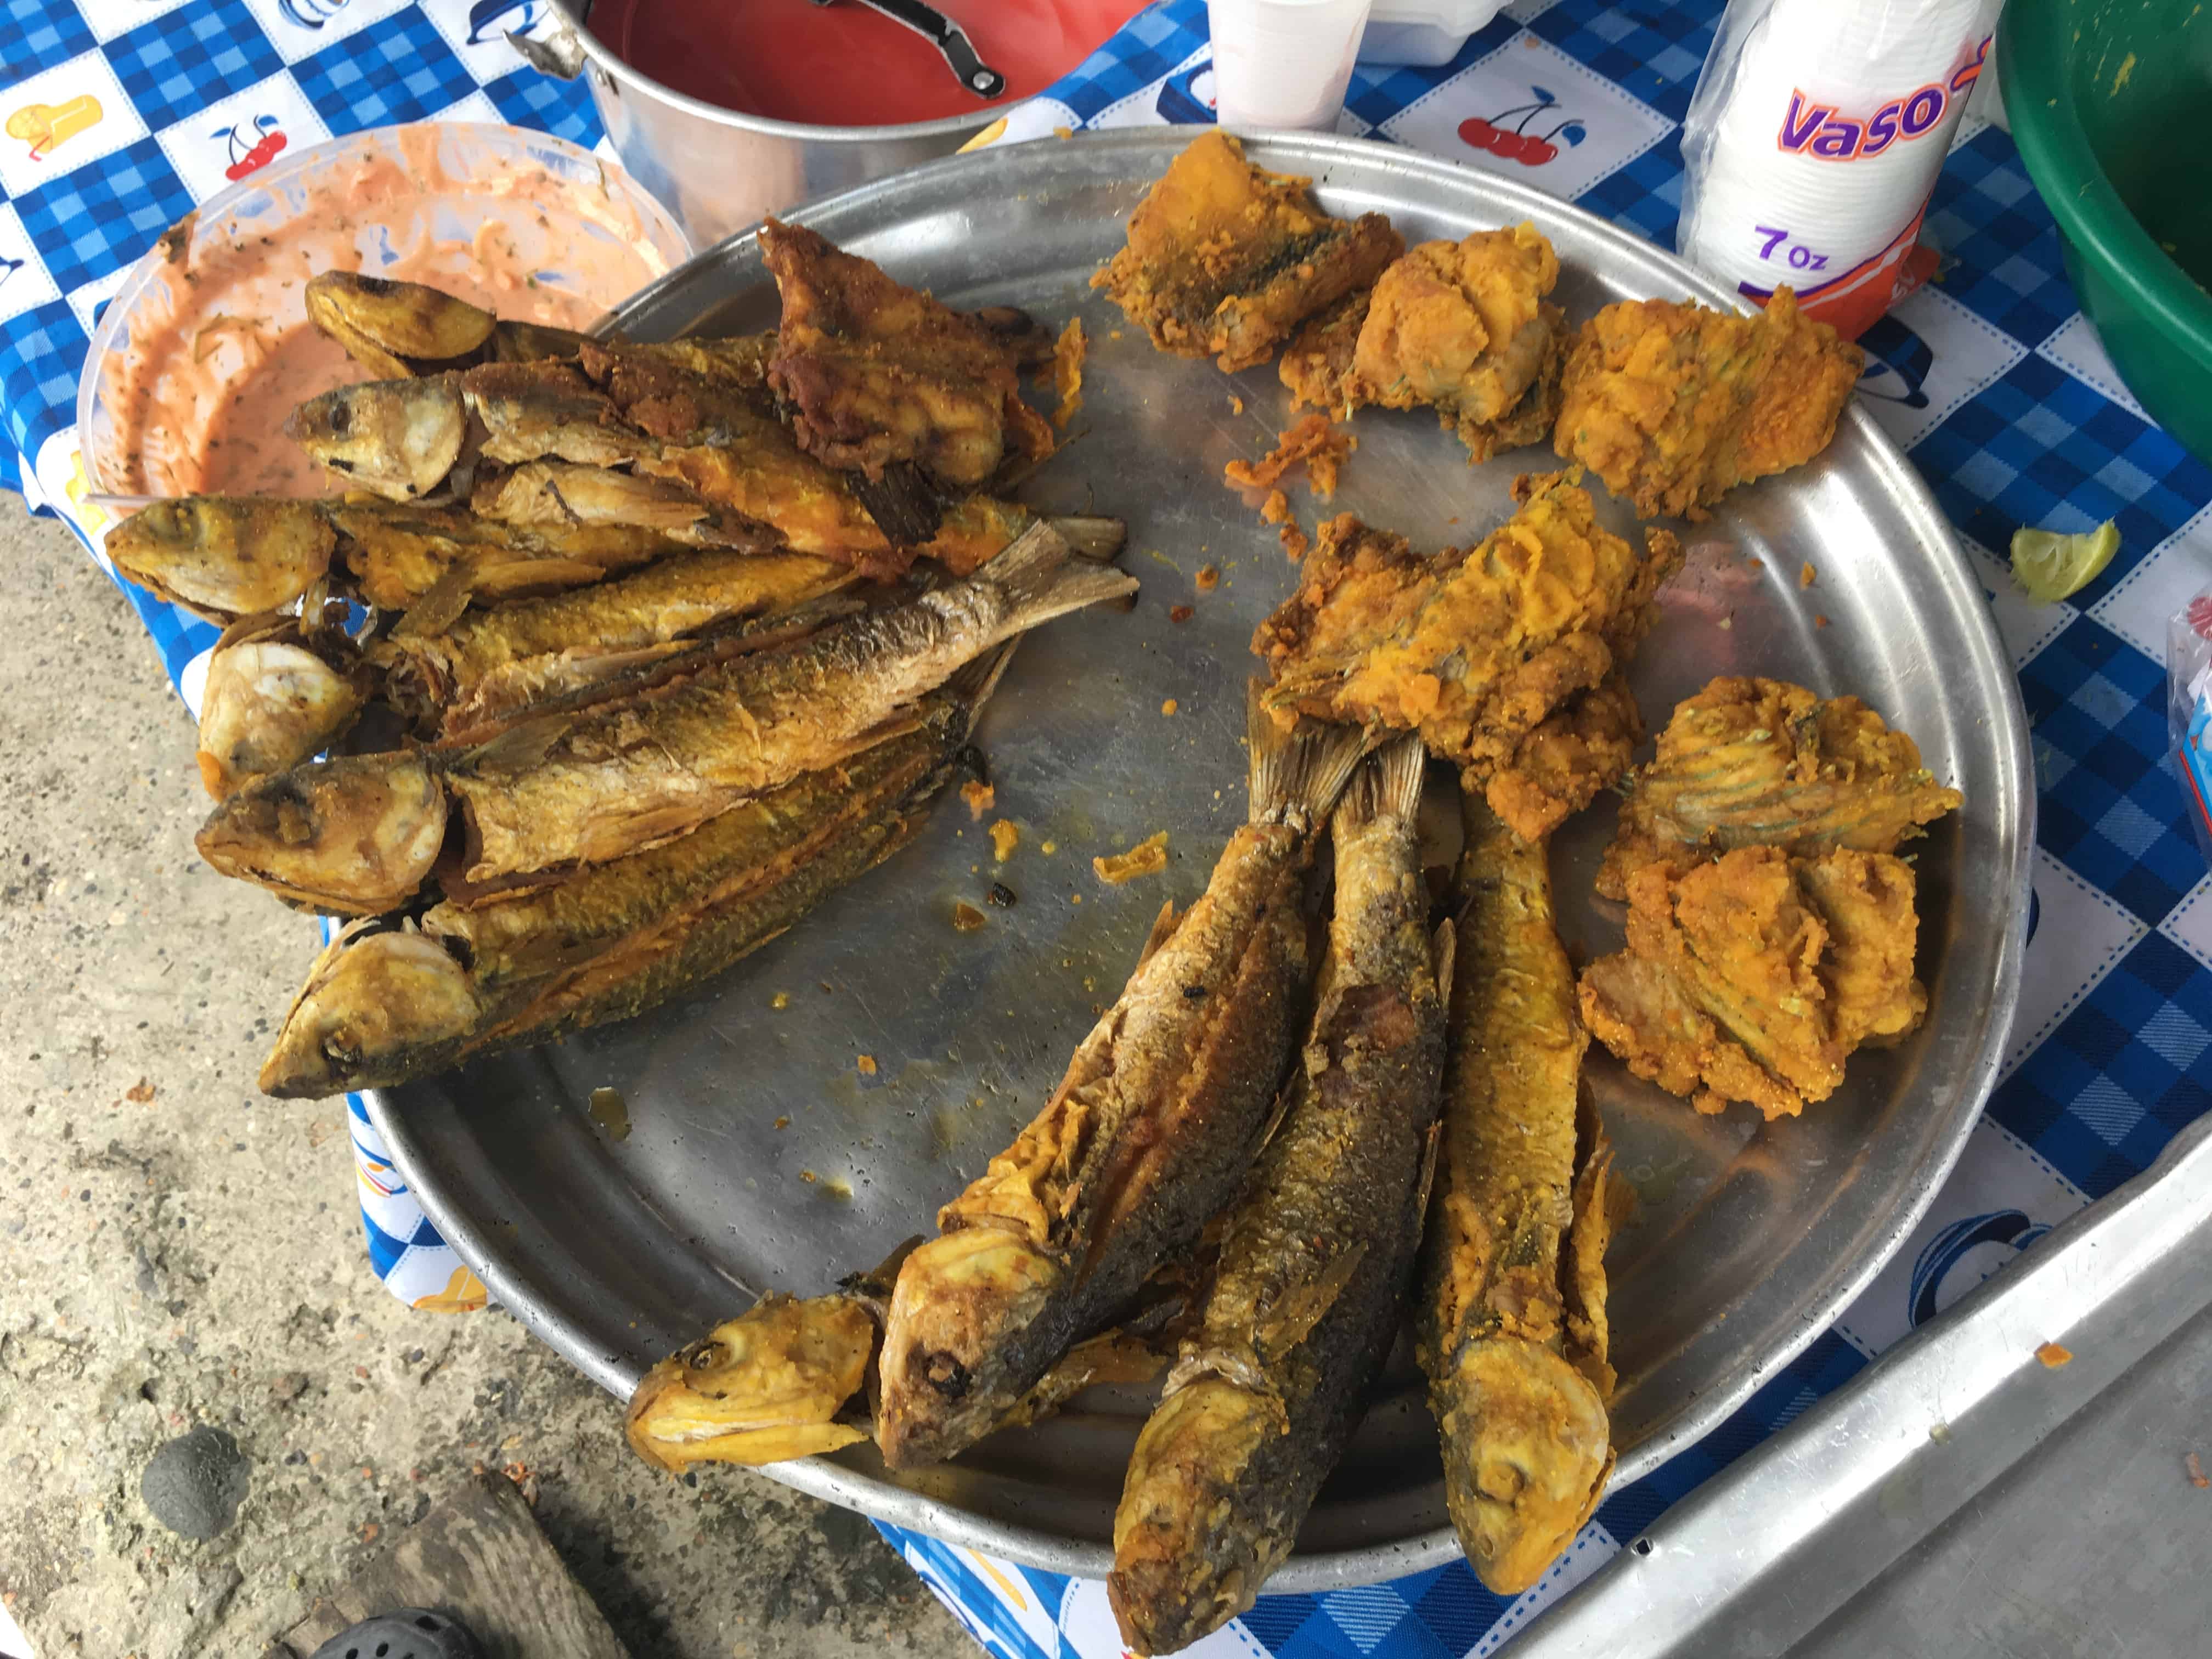 Fried fish in Juanchaco, Valle del Cauca, Colombia